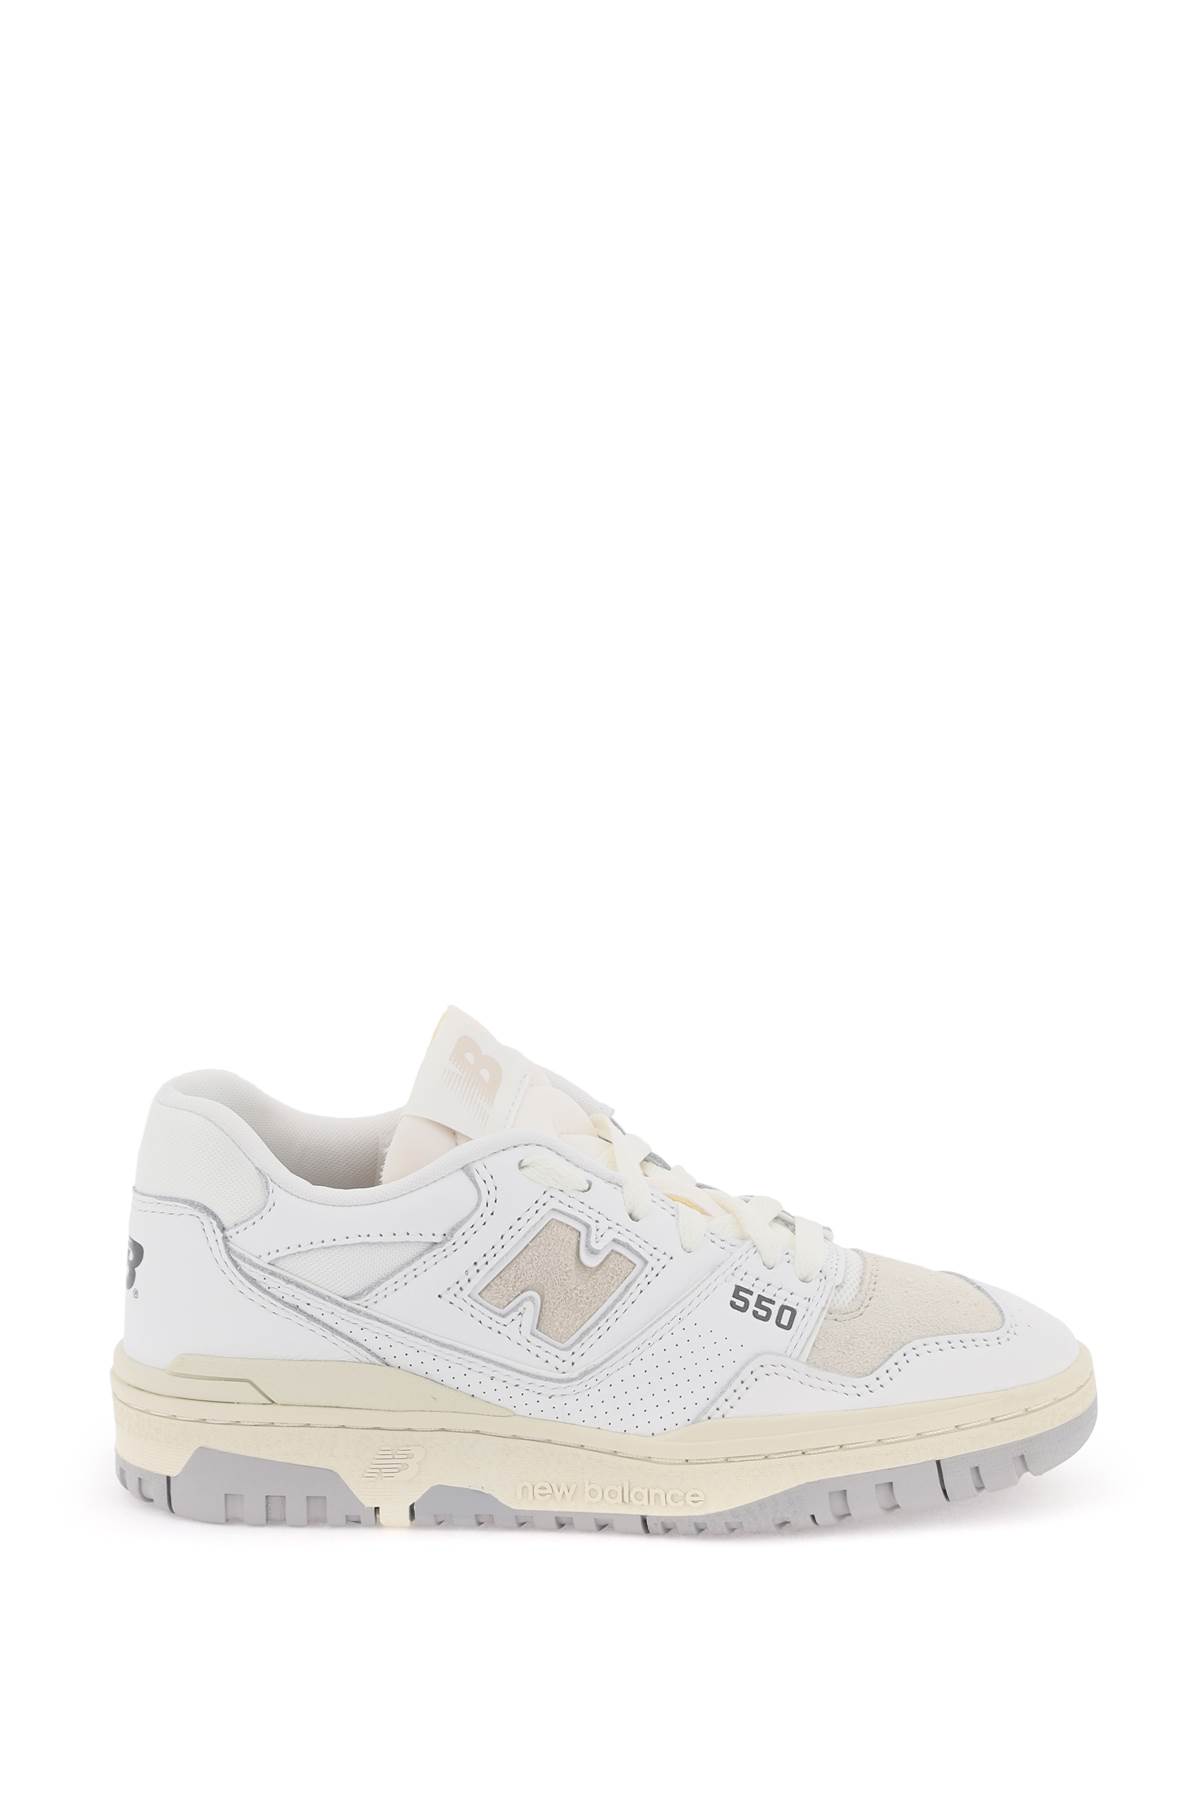 Shop New Balance 550 Sneakers In White (beige)